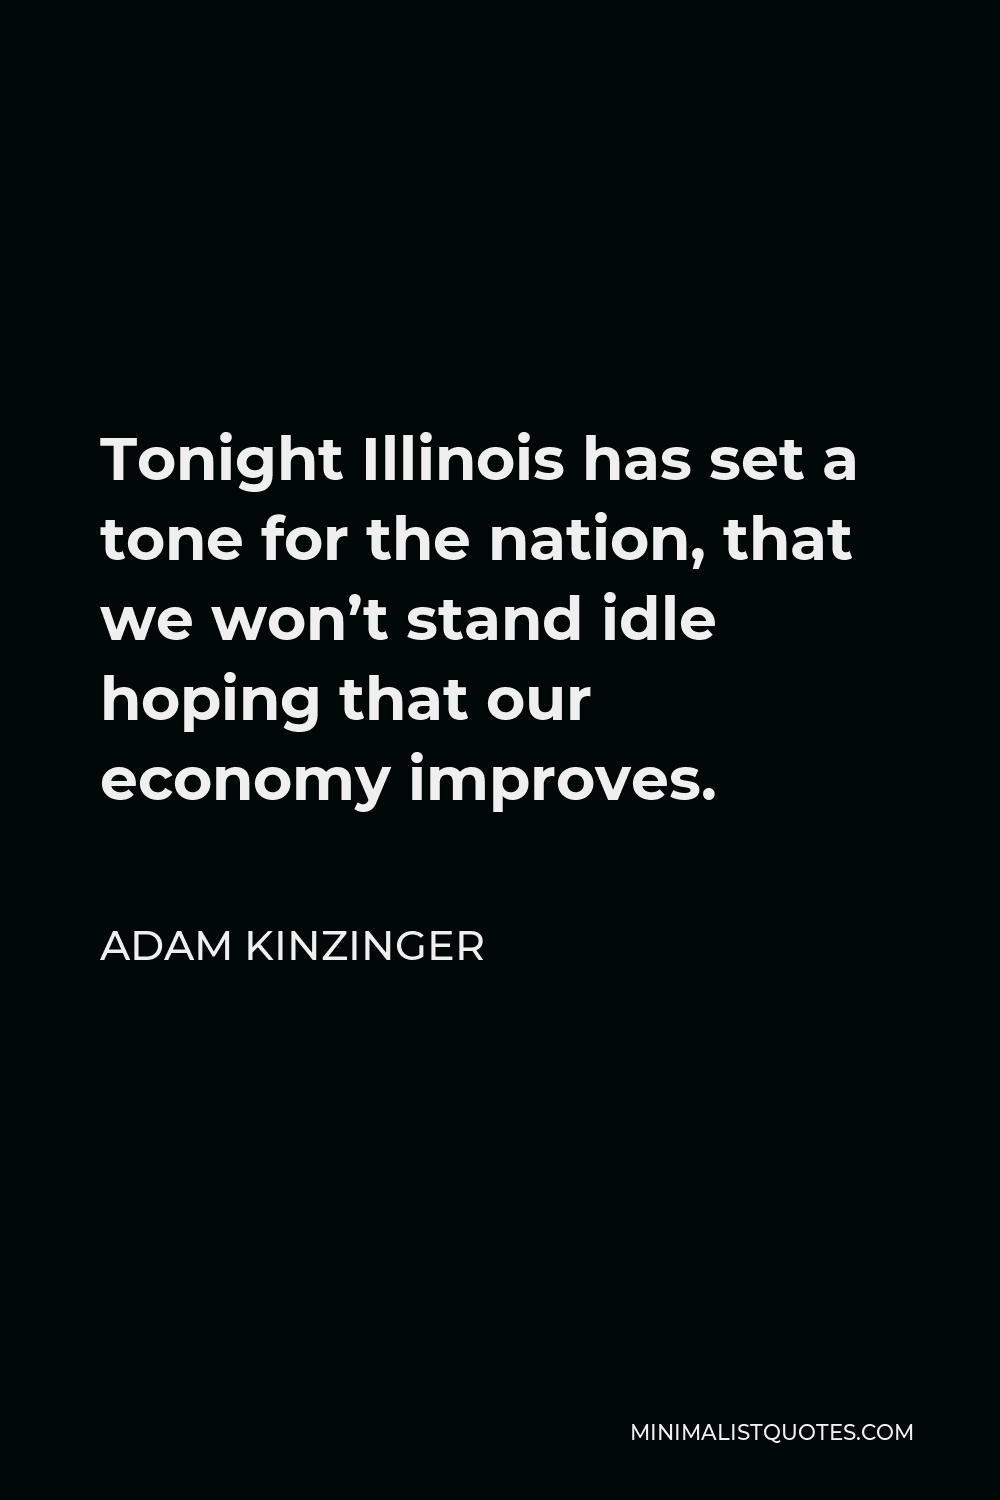 Adam Kinzinger Quote - Tonight Illinois has set a tone for the nation, that we won’t stand idle hoping that our economy improves.